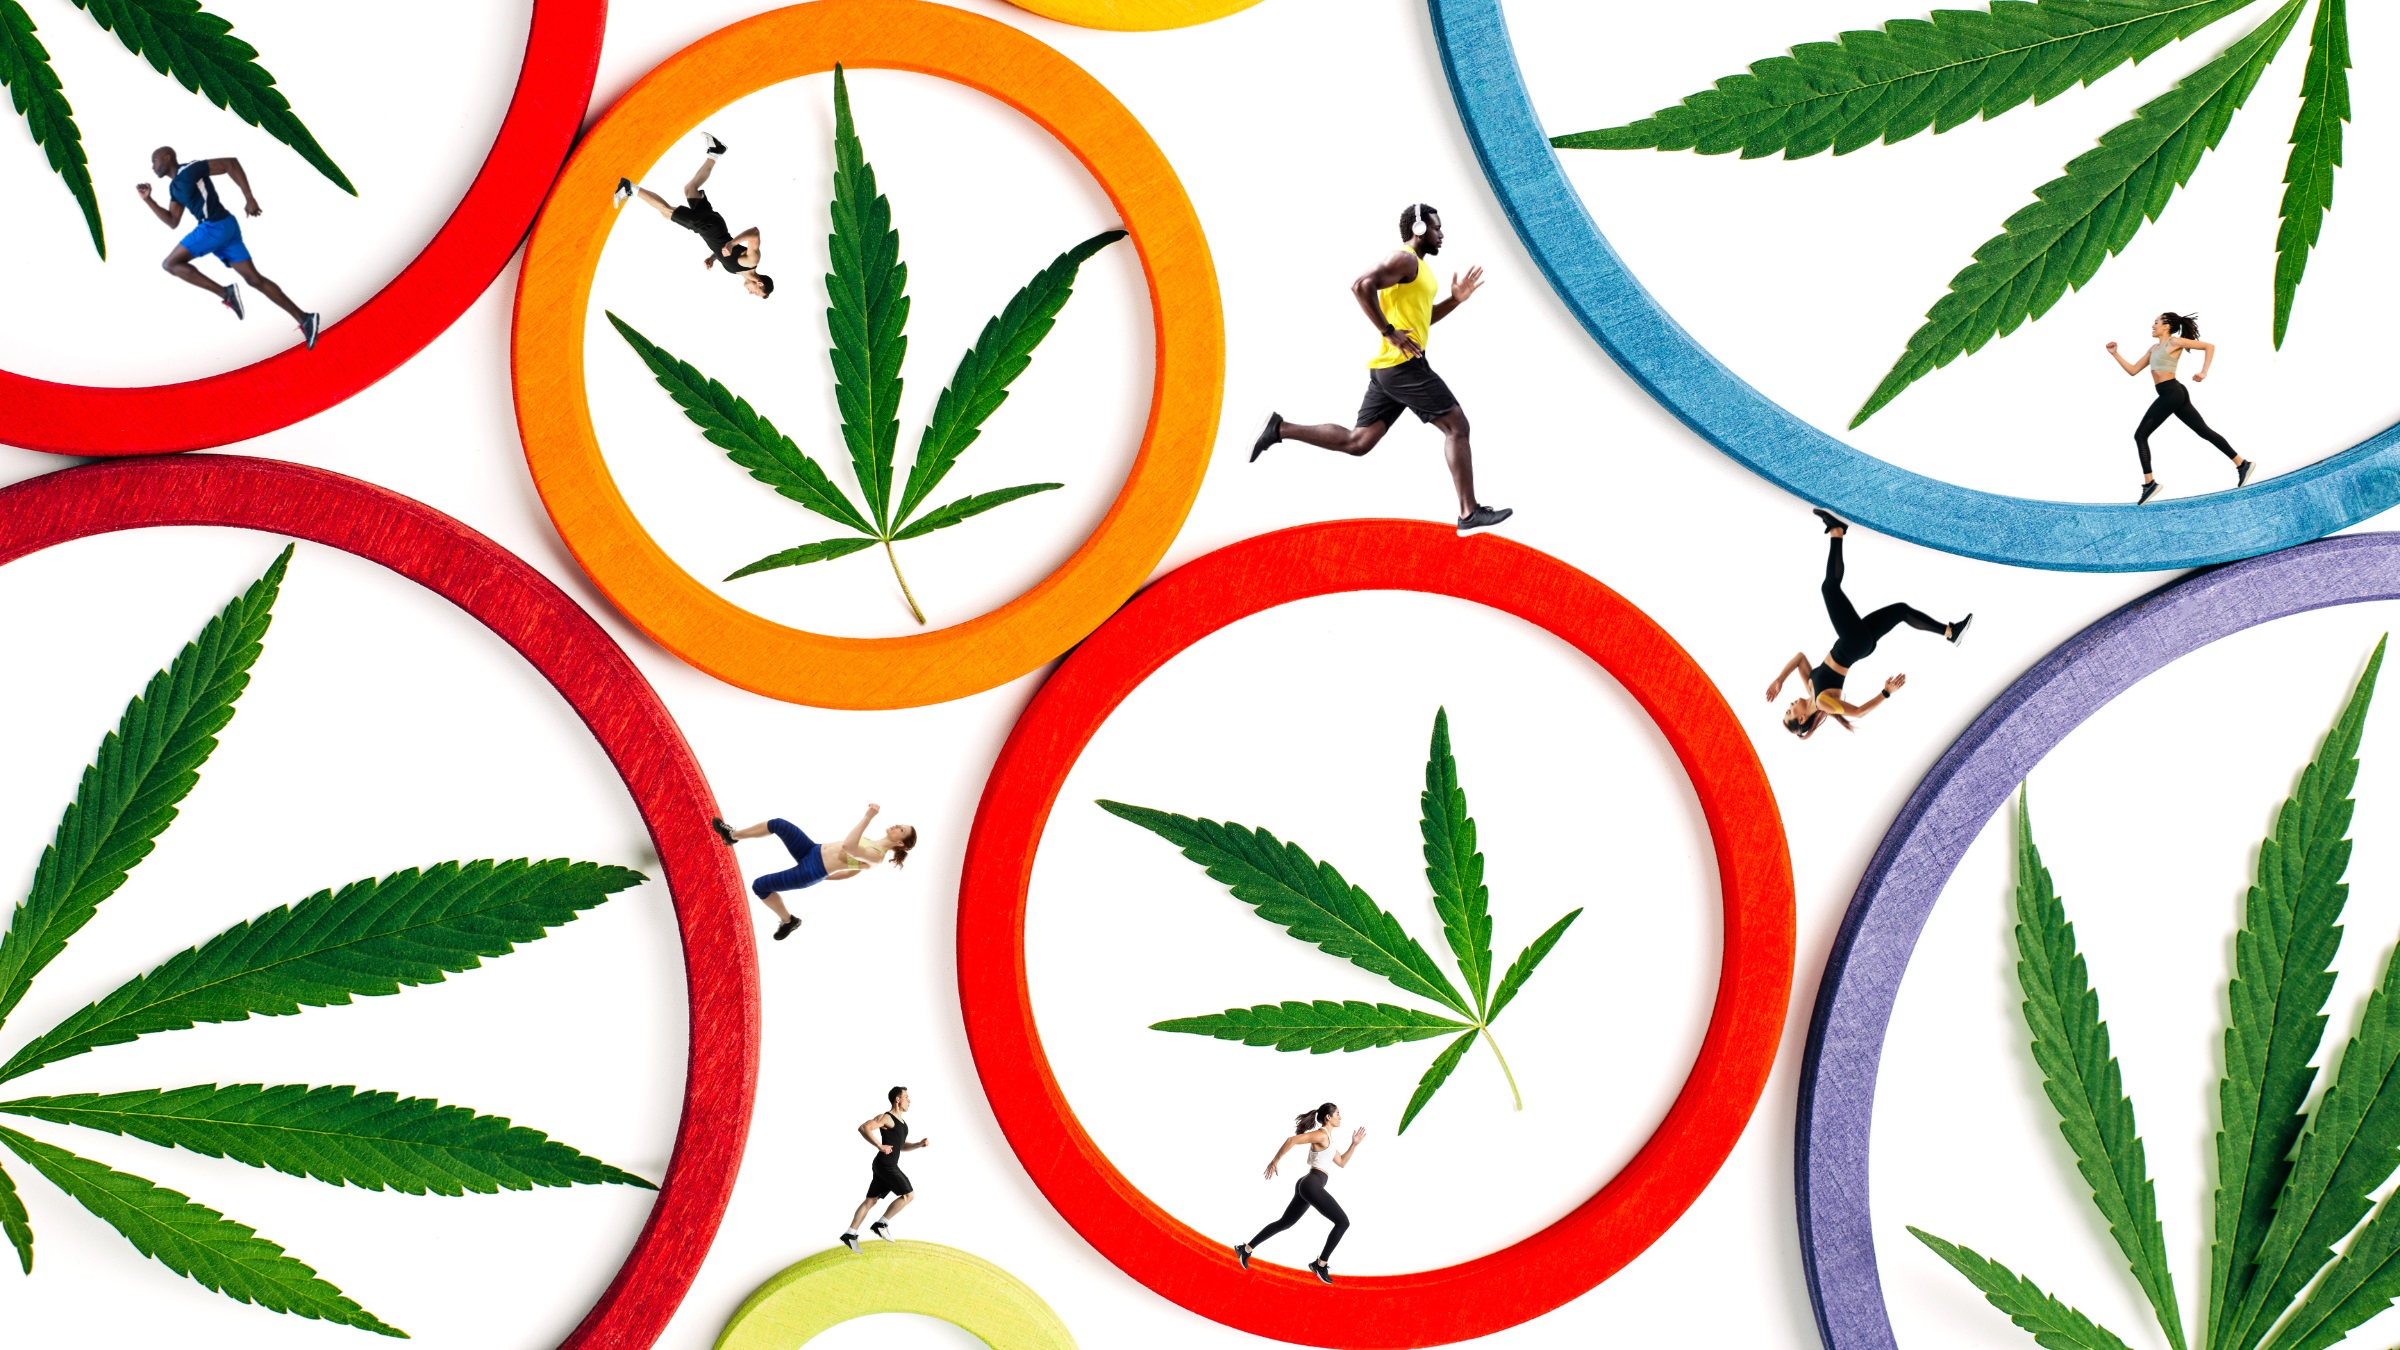 Pain Management in Sports: How CBD and THC Edibles Can Help